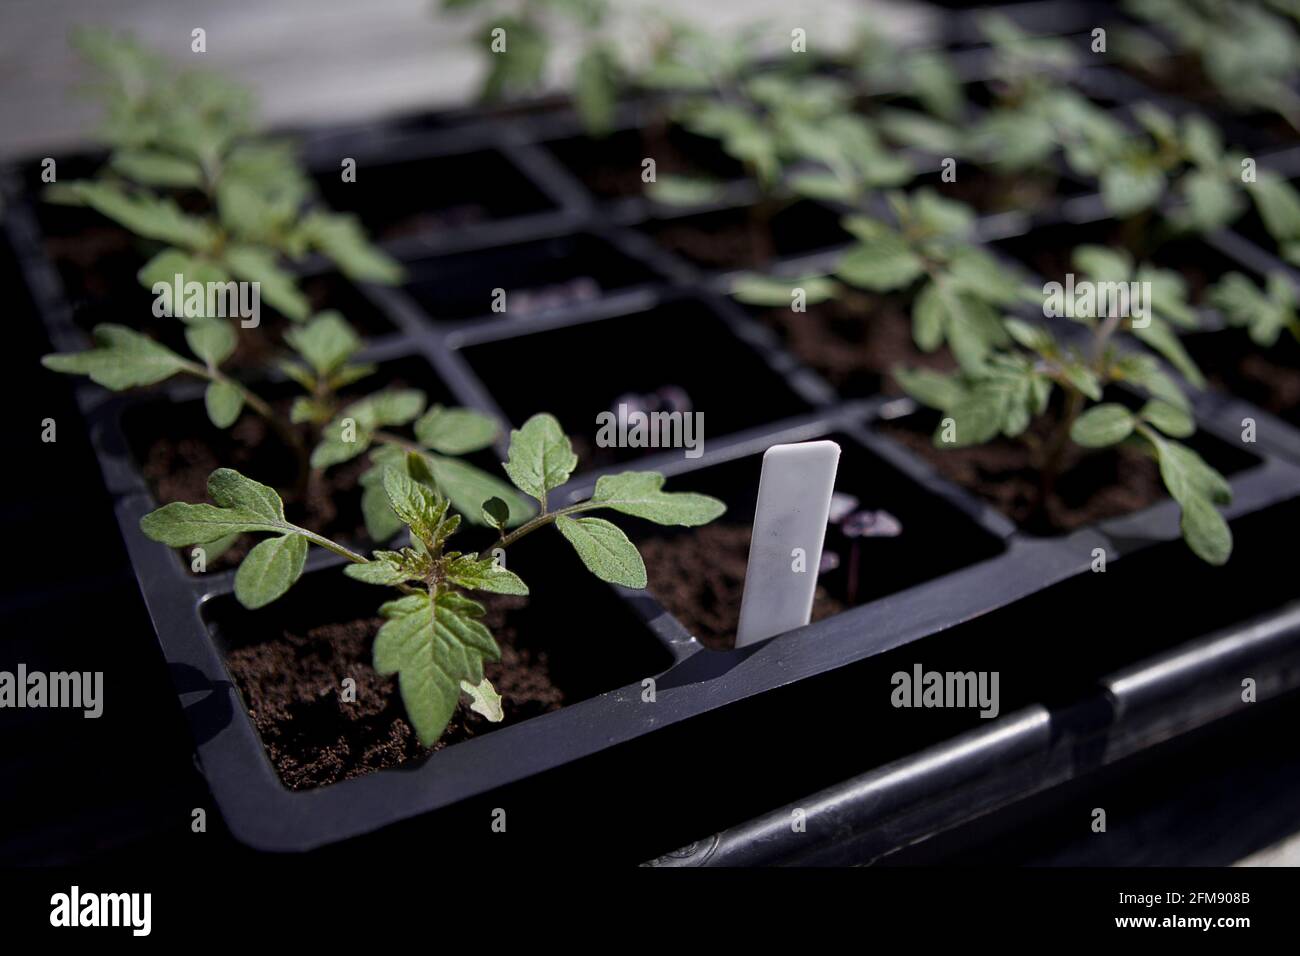 Young tomato plants (Solanum lycopersicum) grown from seed, in a seed tray. Grow your own. Garden allotment Stock Photo